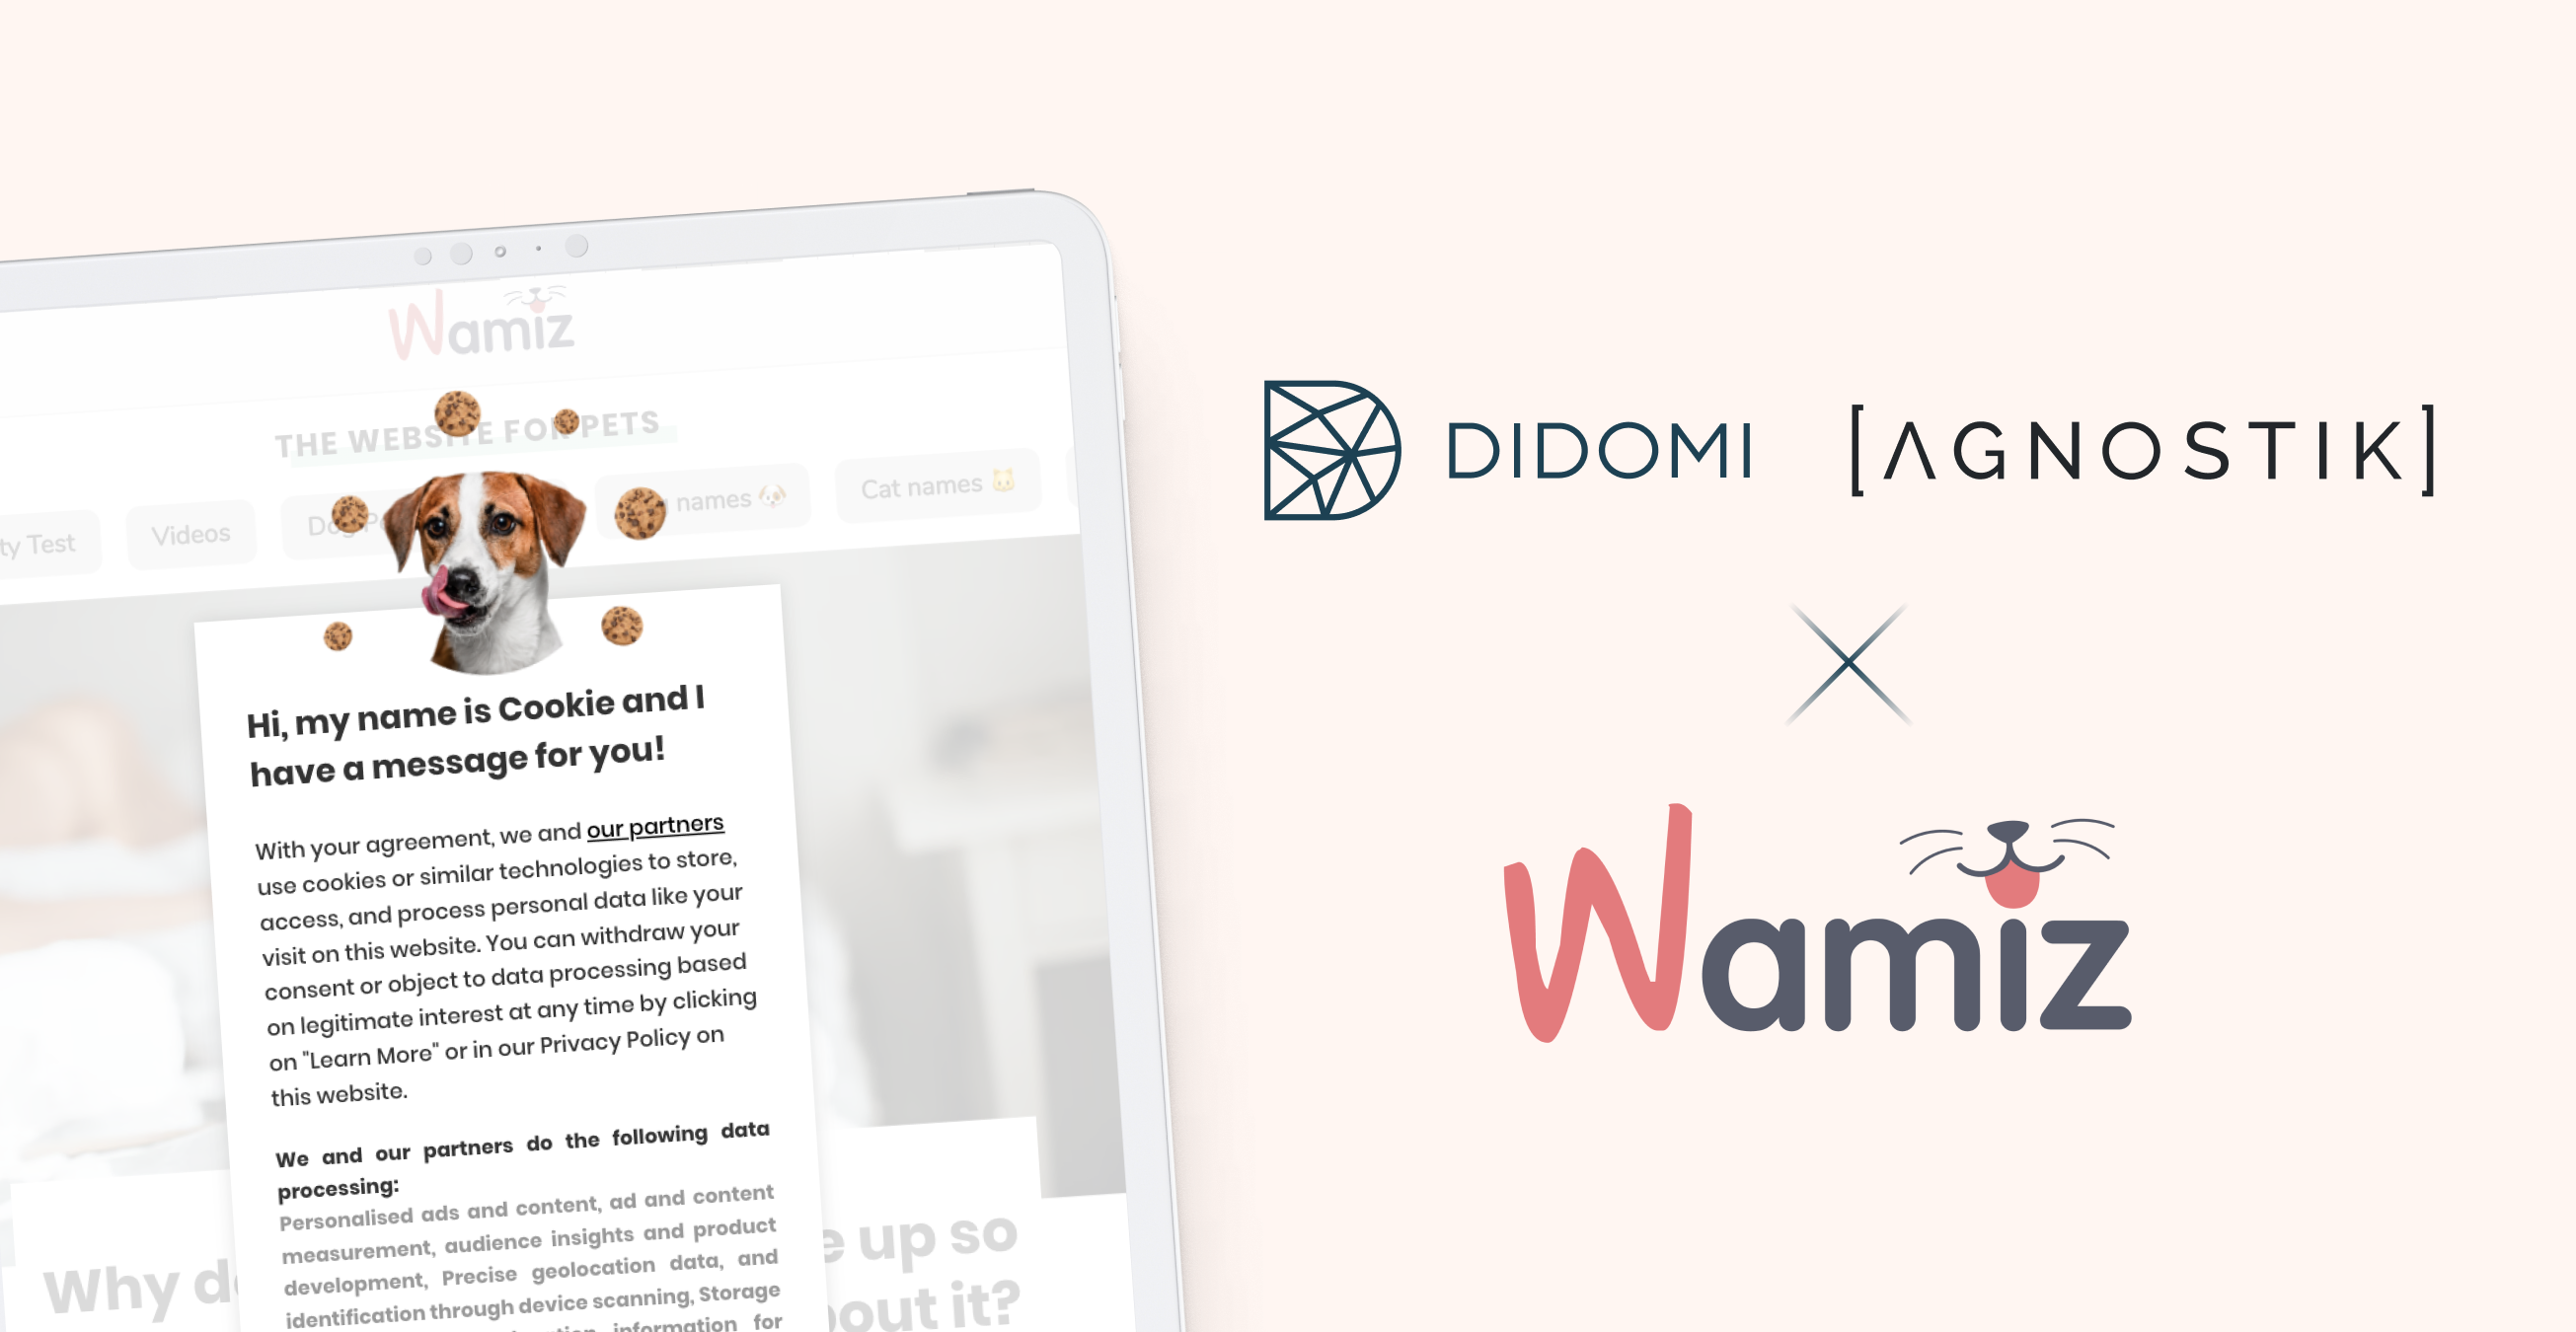 How did Wamiz combine consent and vendors management thanks to the Didomi & Agnostik Solution?